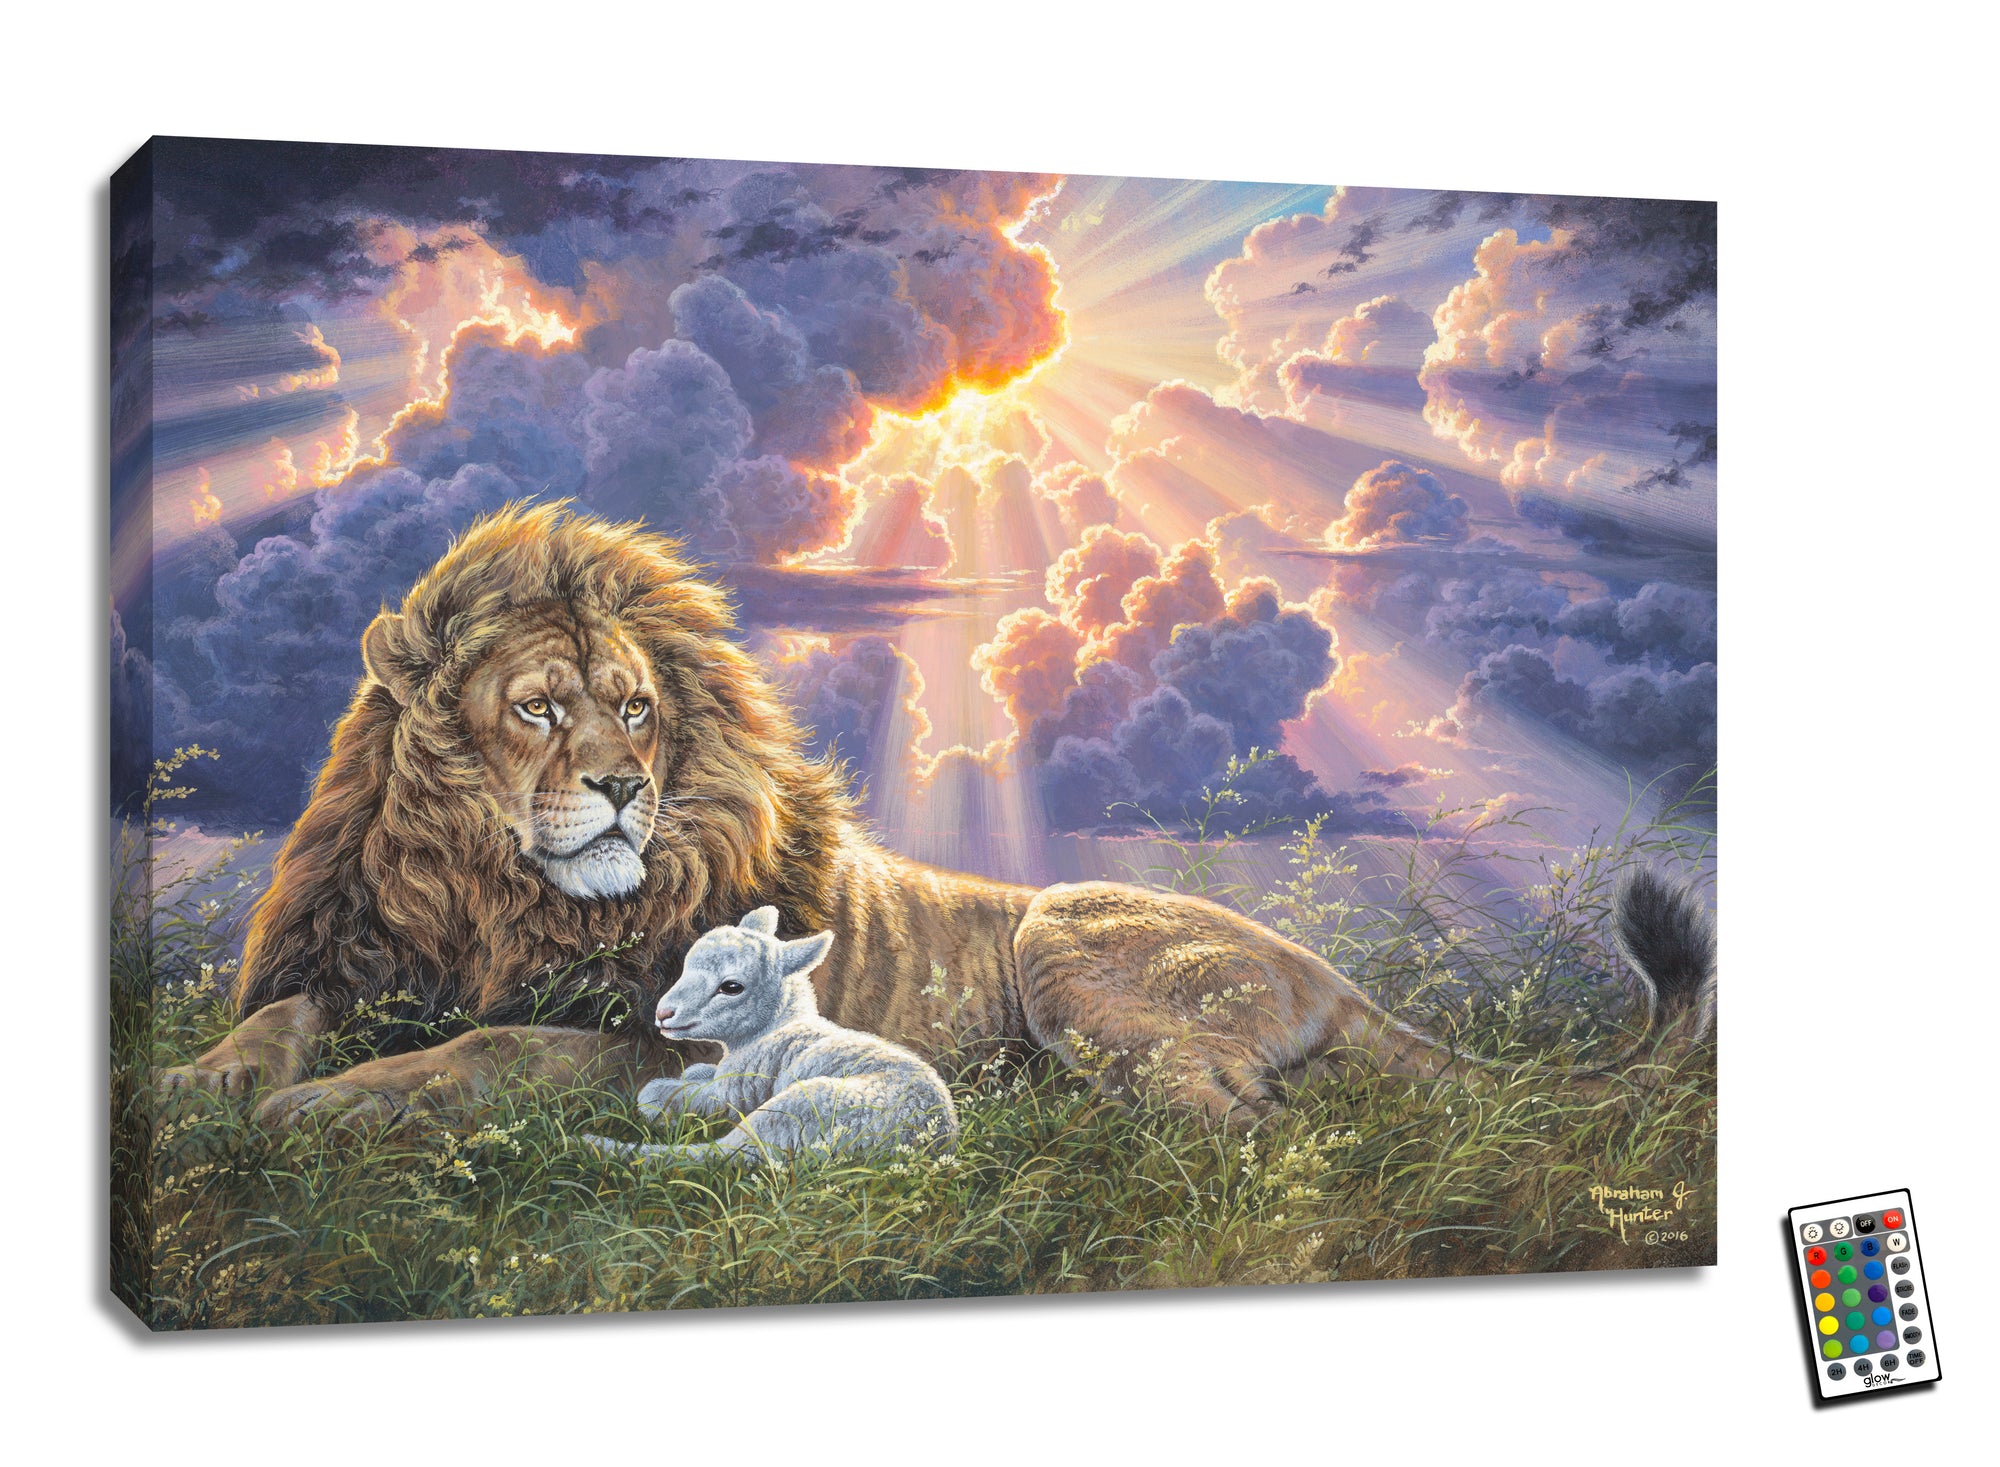  Behold a majestic lion, king of the jungle, peacefully laying in a field, its majestic mane swaying gently in the wind. But what makes this artwork truly special is the gentle lamb that lays next to the lion, symbolizing the power of love and the beauty of acceptance.